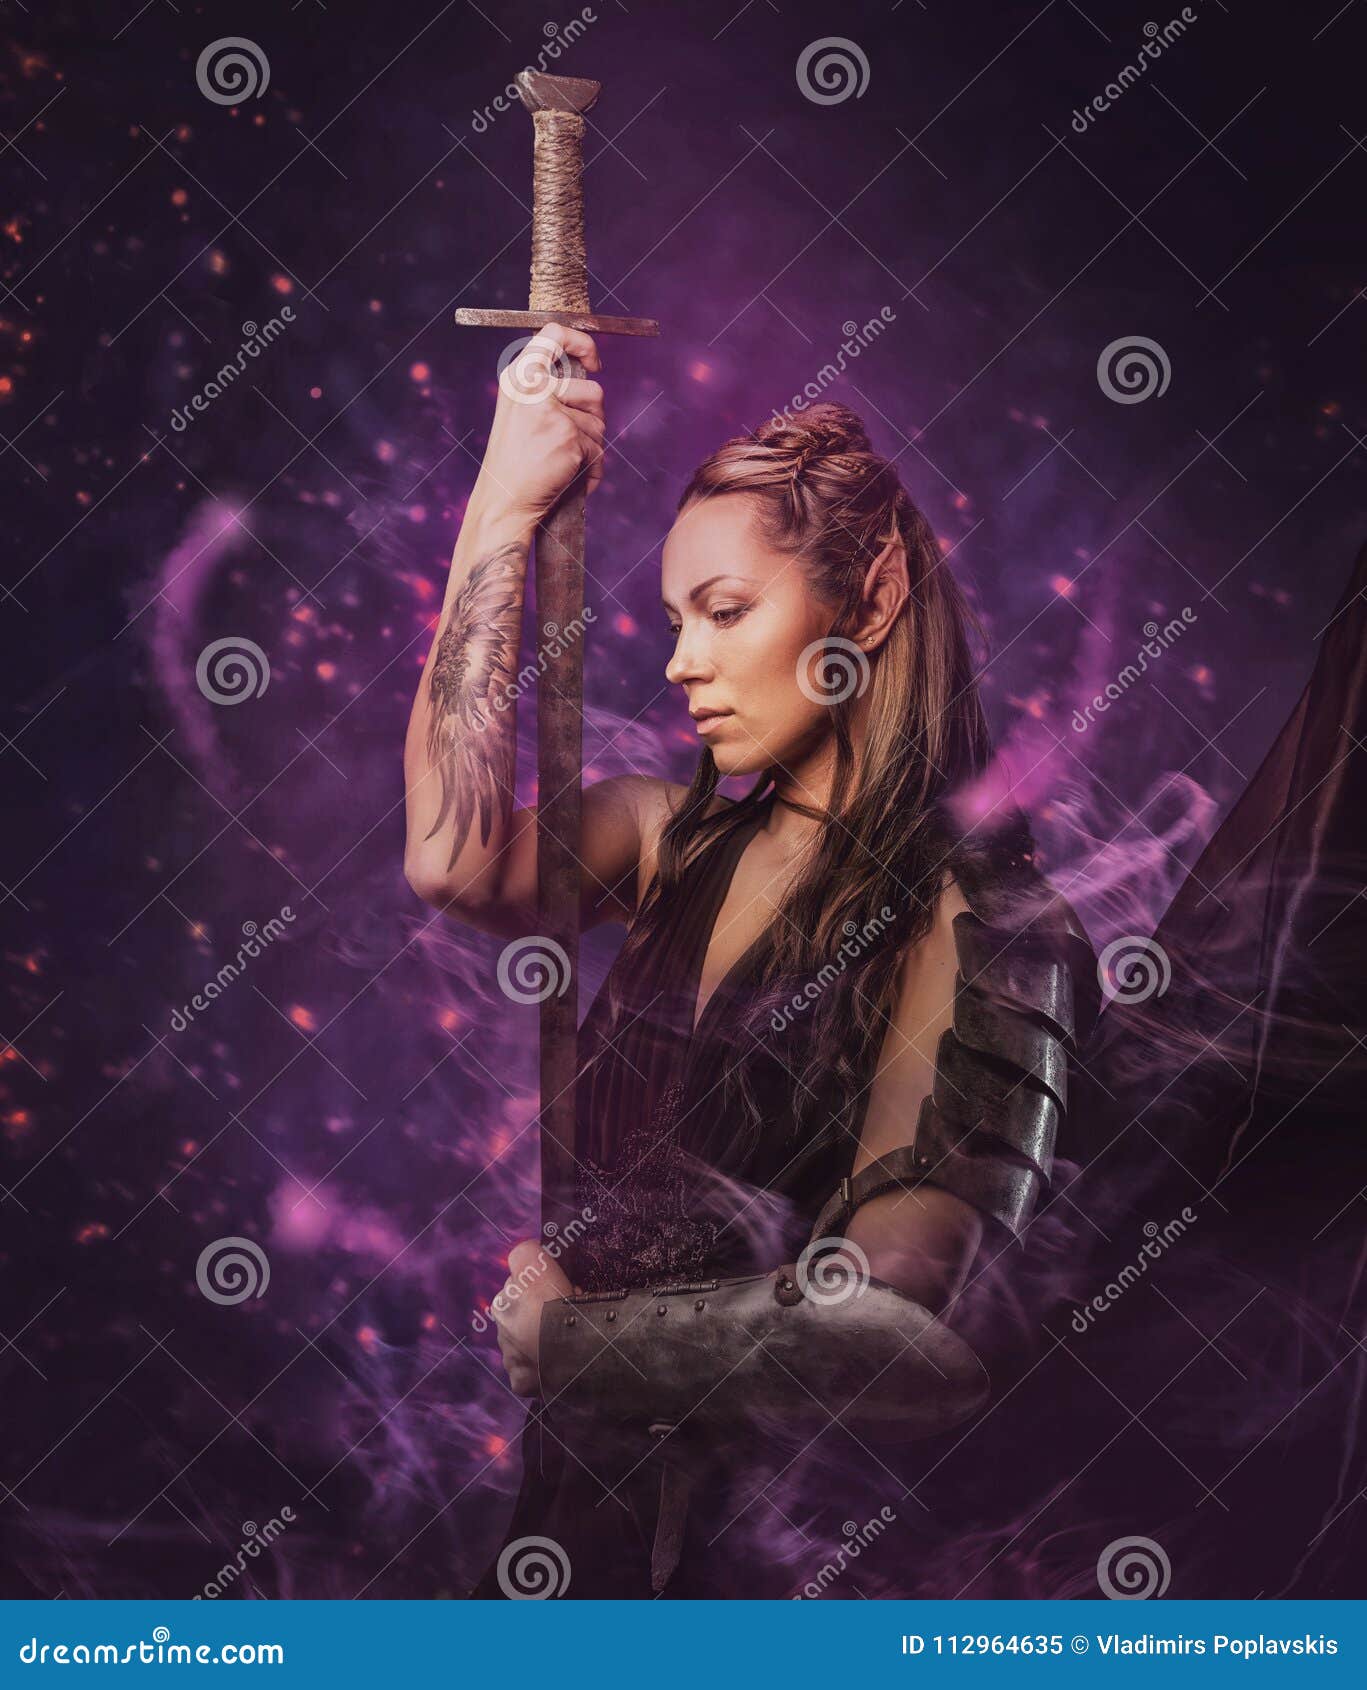 Premium Photo  A woman with a tattoo on her chest is holding a sword